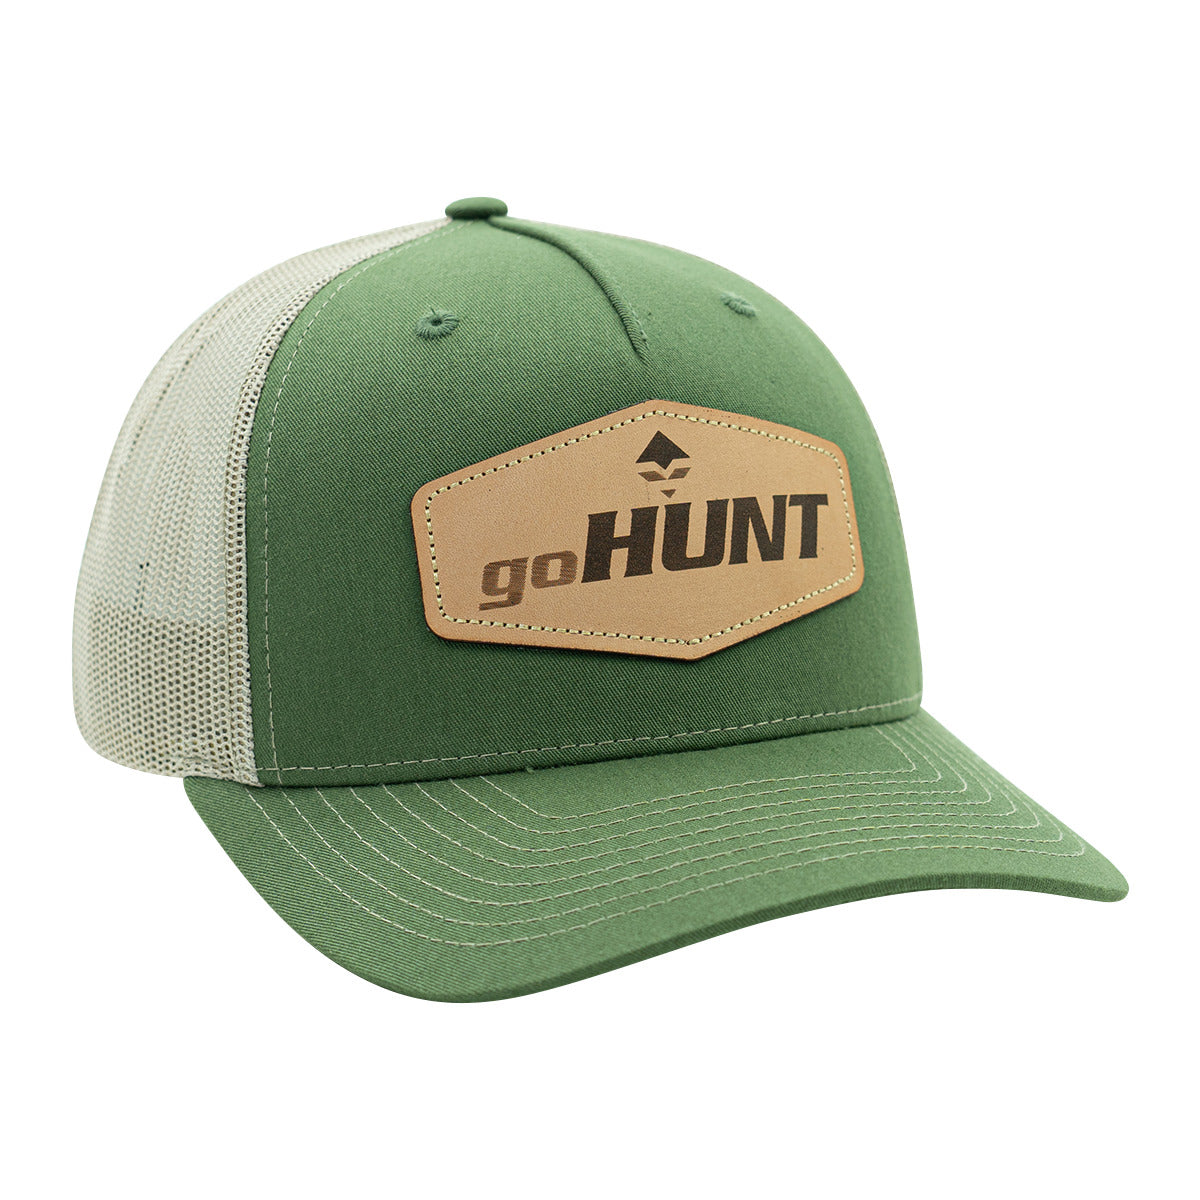 Trout Fisher in Trout Fisher by goHUNT | Apparel - goHUNT Shop by GOHUNT | GOHUNT - GOHUNT Shop